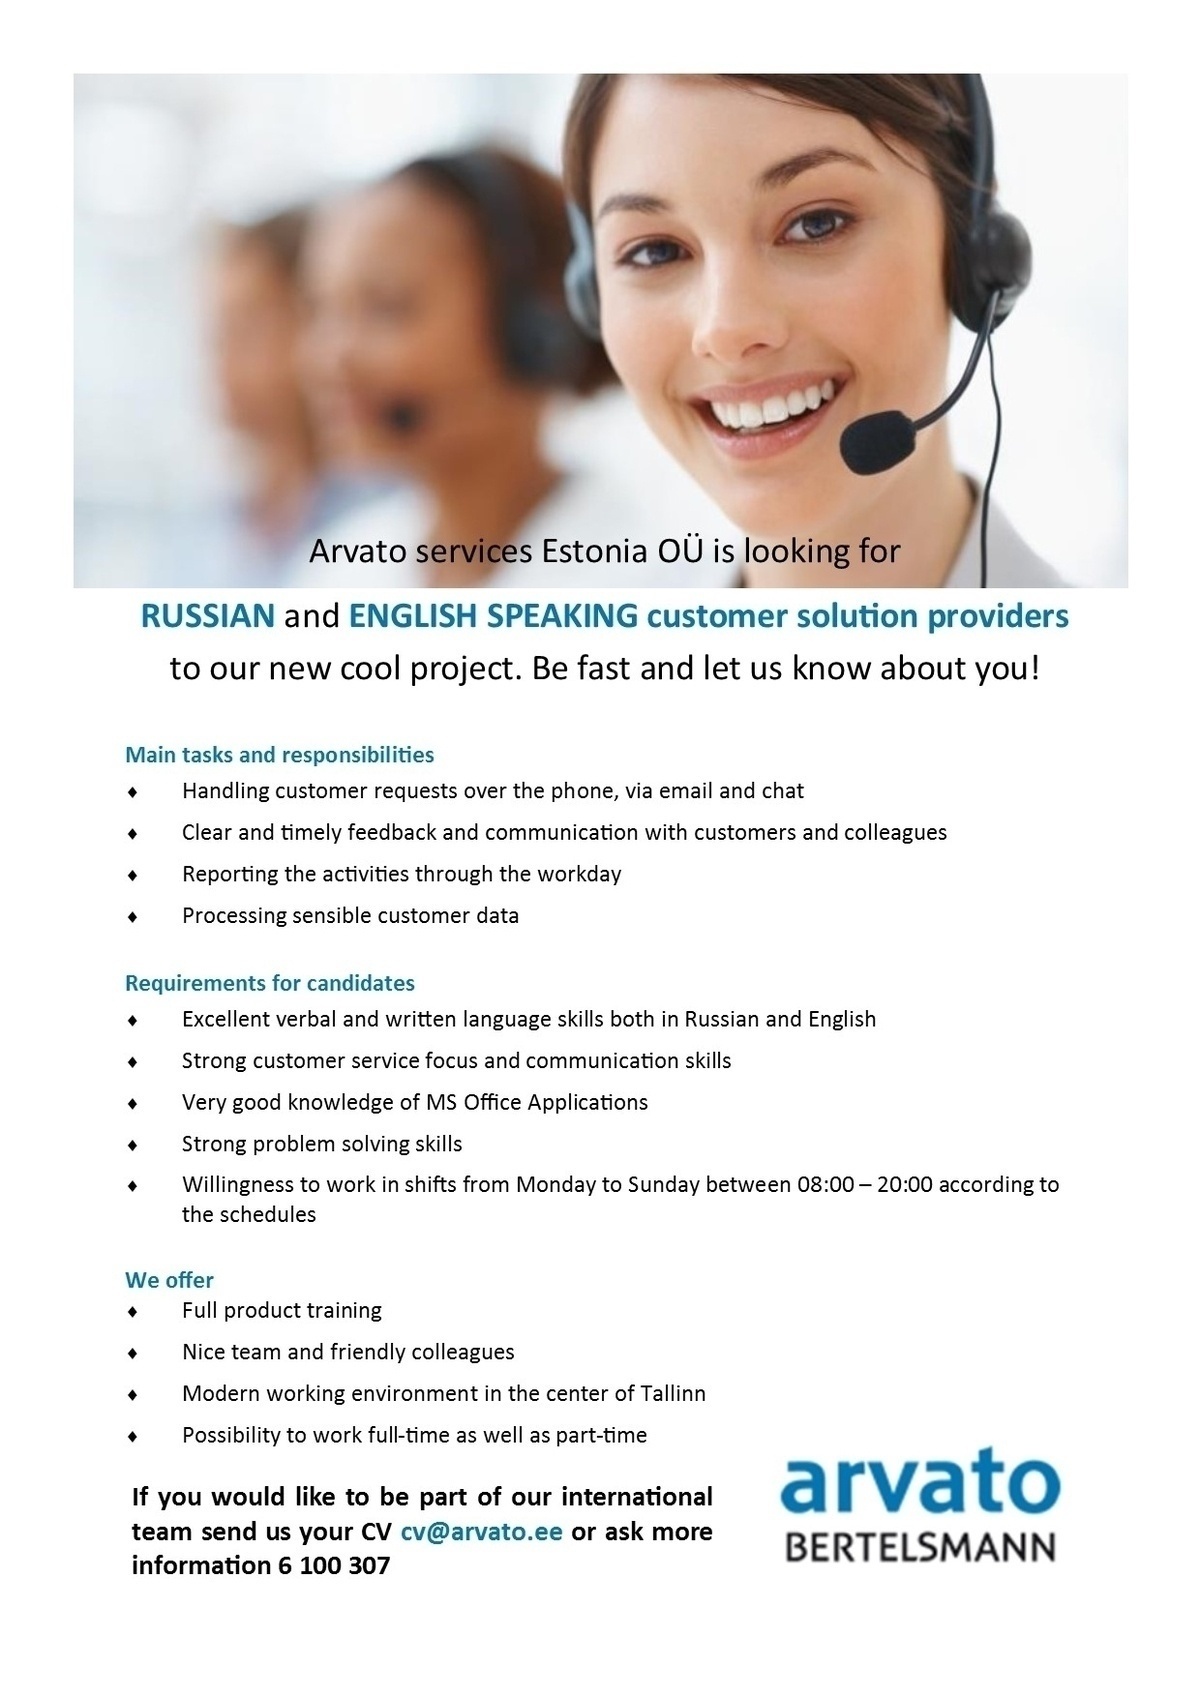 Arvato Services Estonia OÜ Russian and English speaking Customer Solution Provider